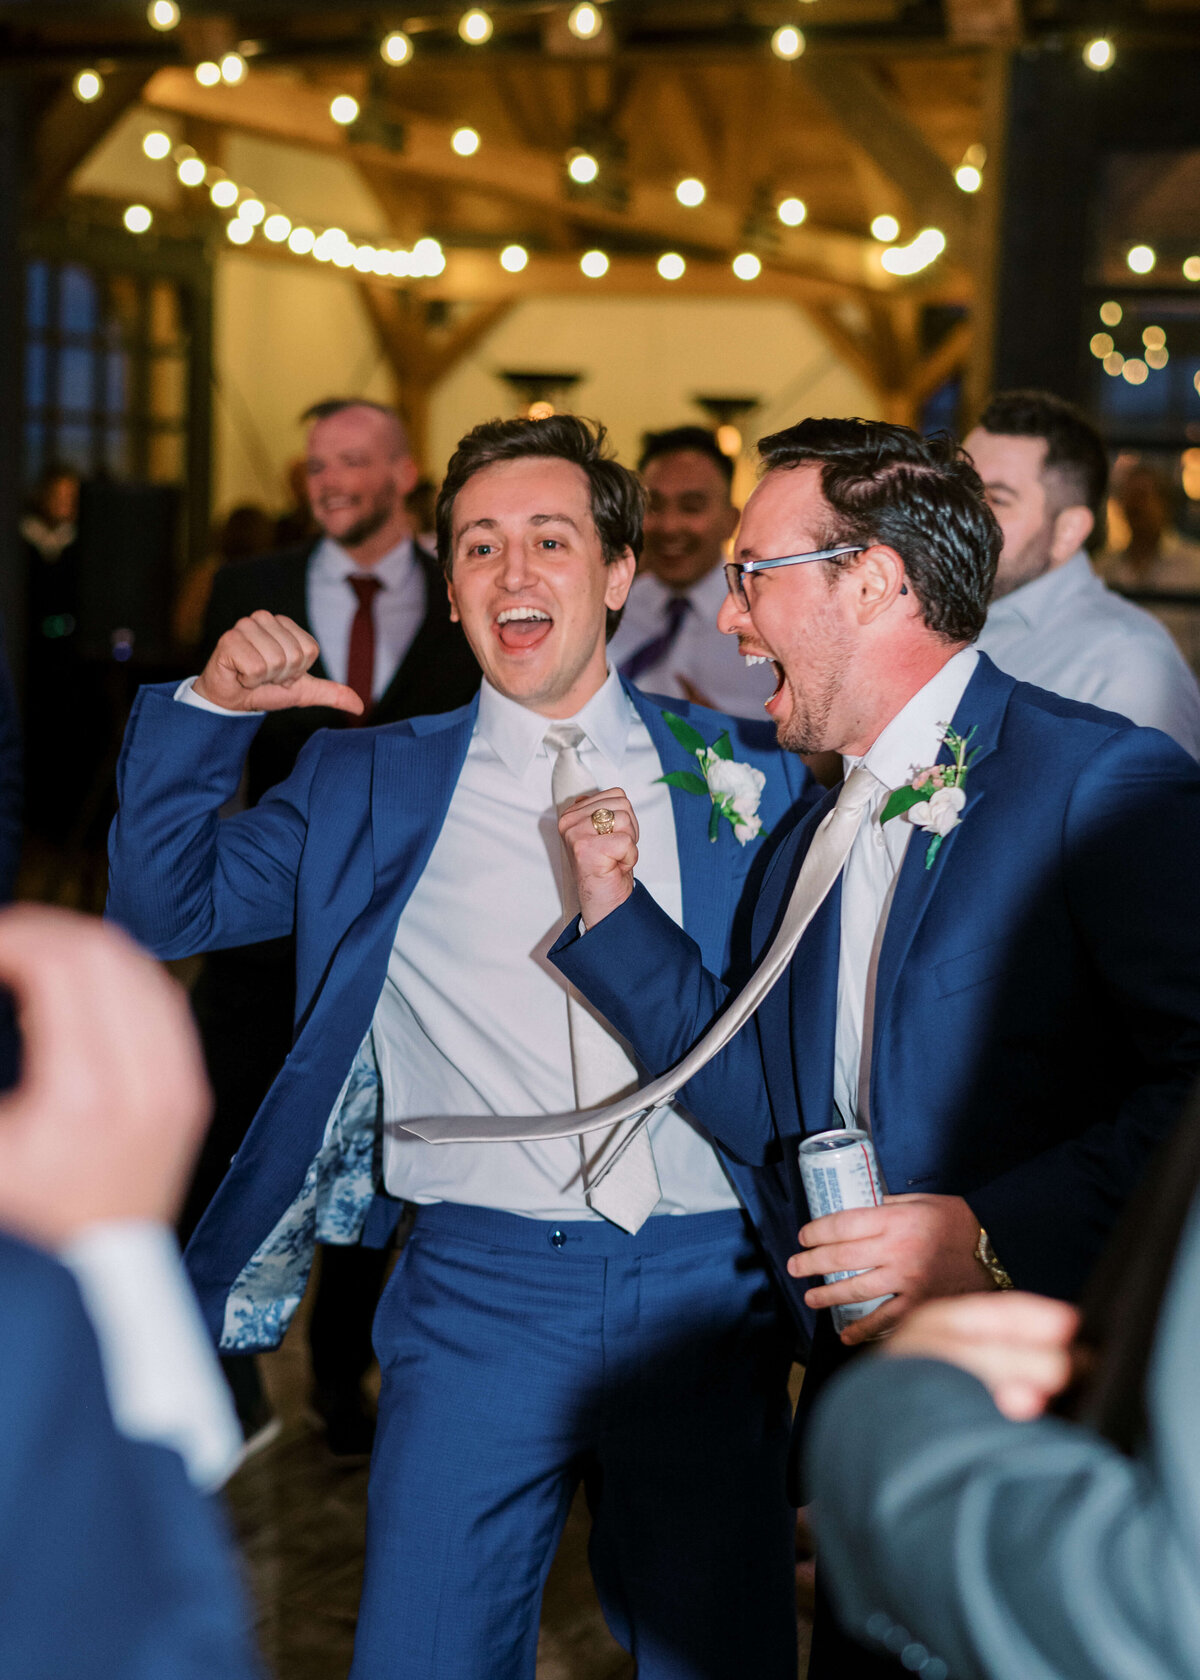 The groom and his friend dance and sing under the stars during a fun reception